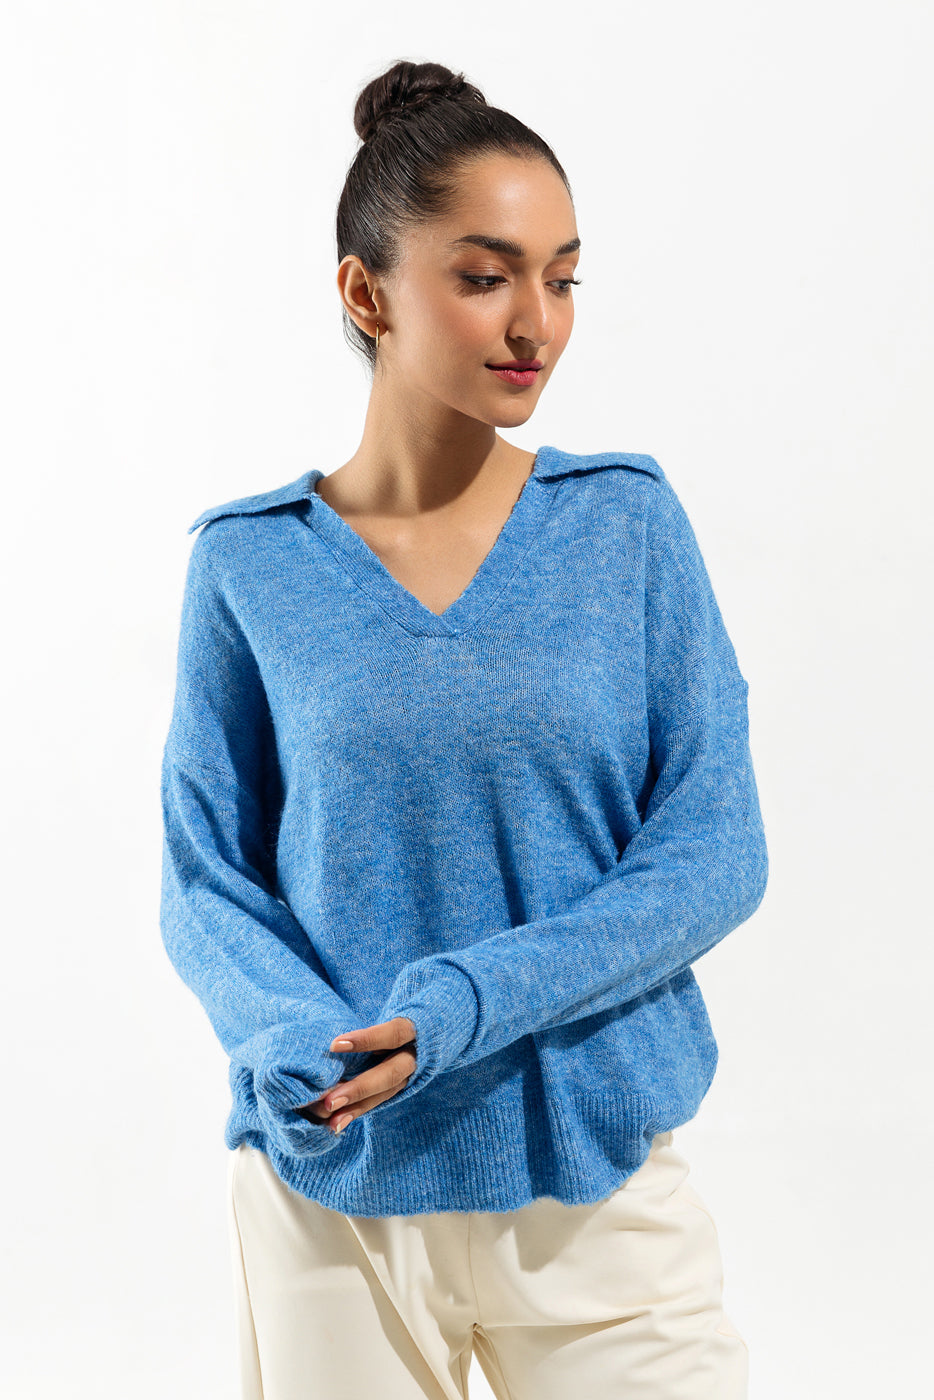 Blue Collared Pullover Sweater - BEECHTREE